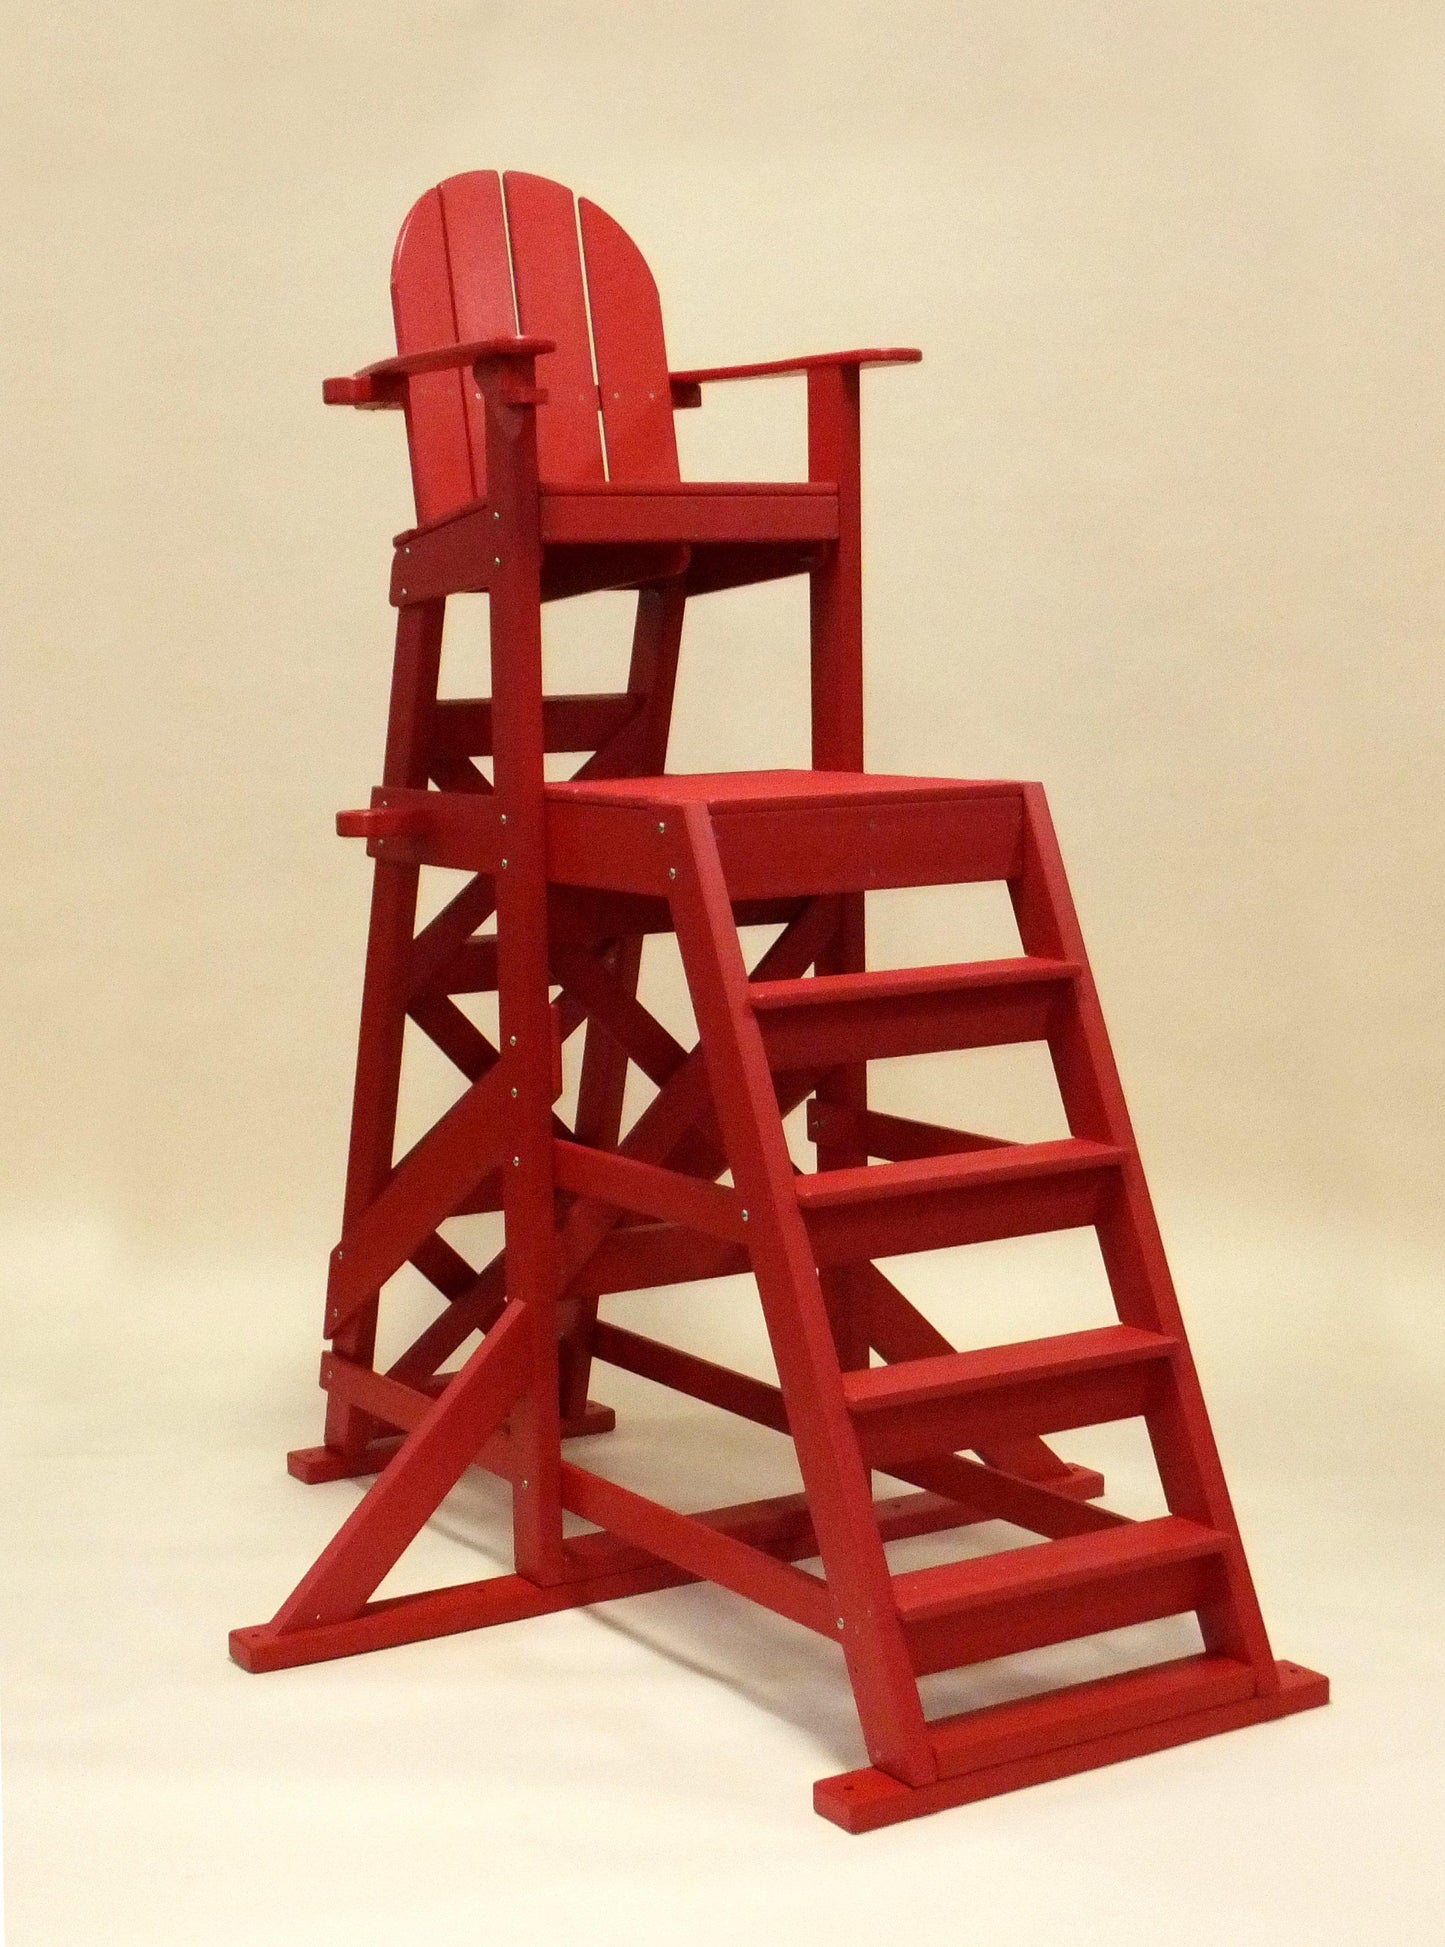 Tailwind Furniture Recycled Plastic TLG-535 Tall Lifeguard Chair - With Front Ladder - Seat Height: 64" - LEAD TIME TO SHIP 10 TO 12 BUSINESS DAYS